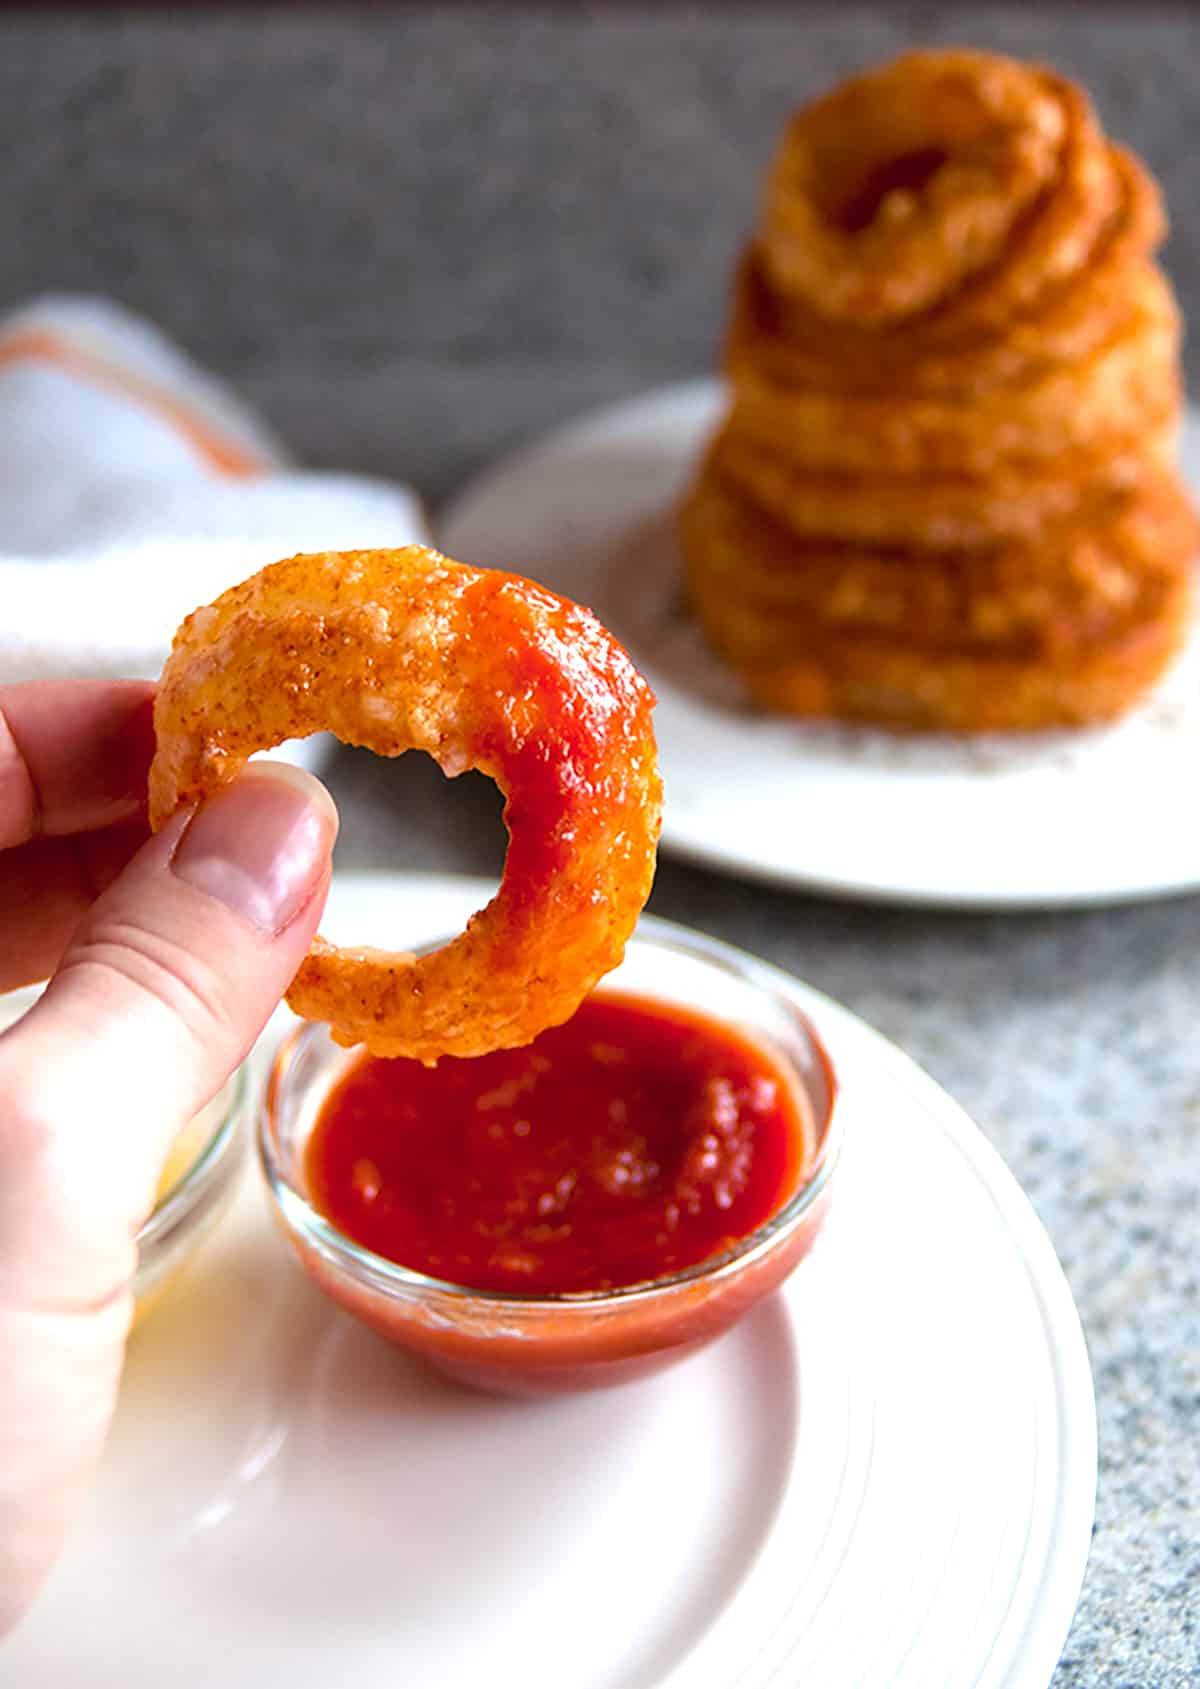 onion ring dipped in sauce.